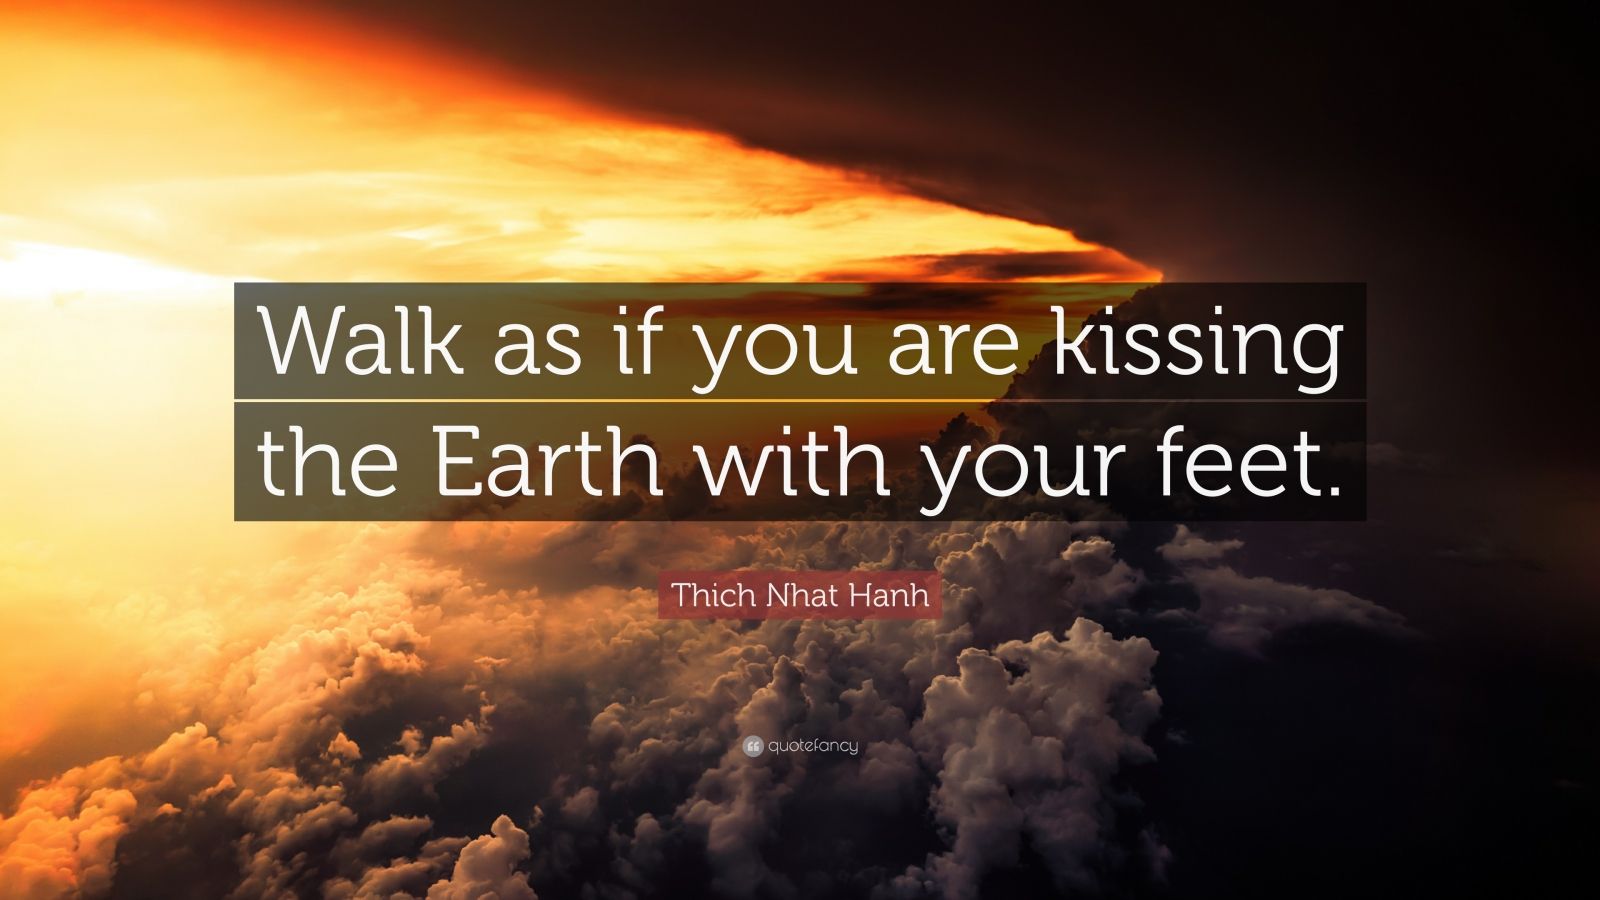 Thich Nhat Hanh Quote: “Walk as if you are kissing the Earth with your ...